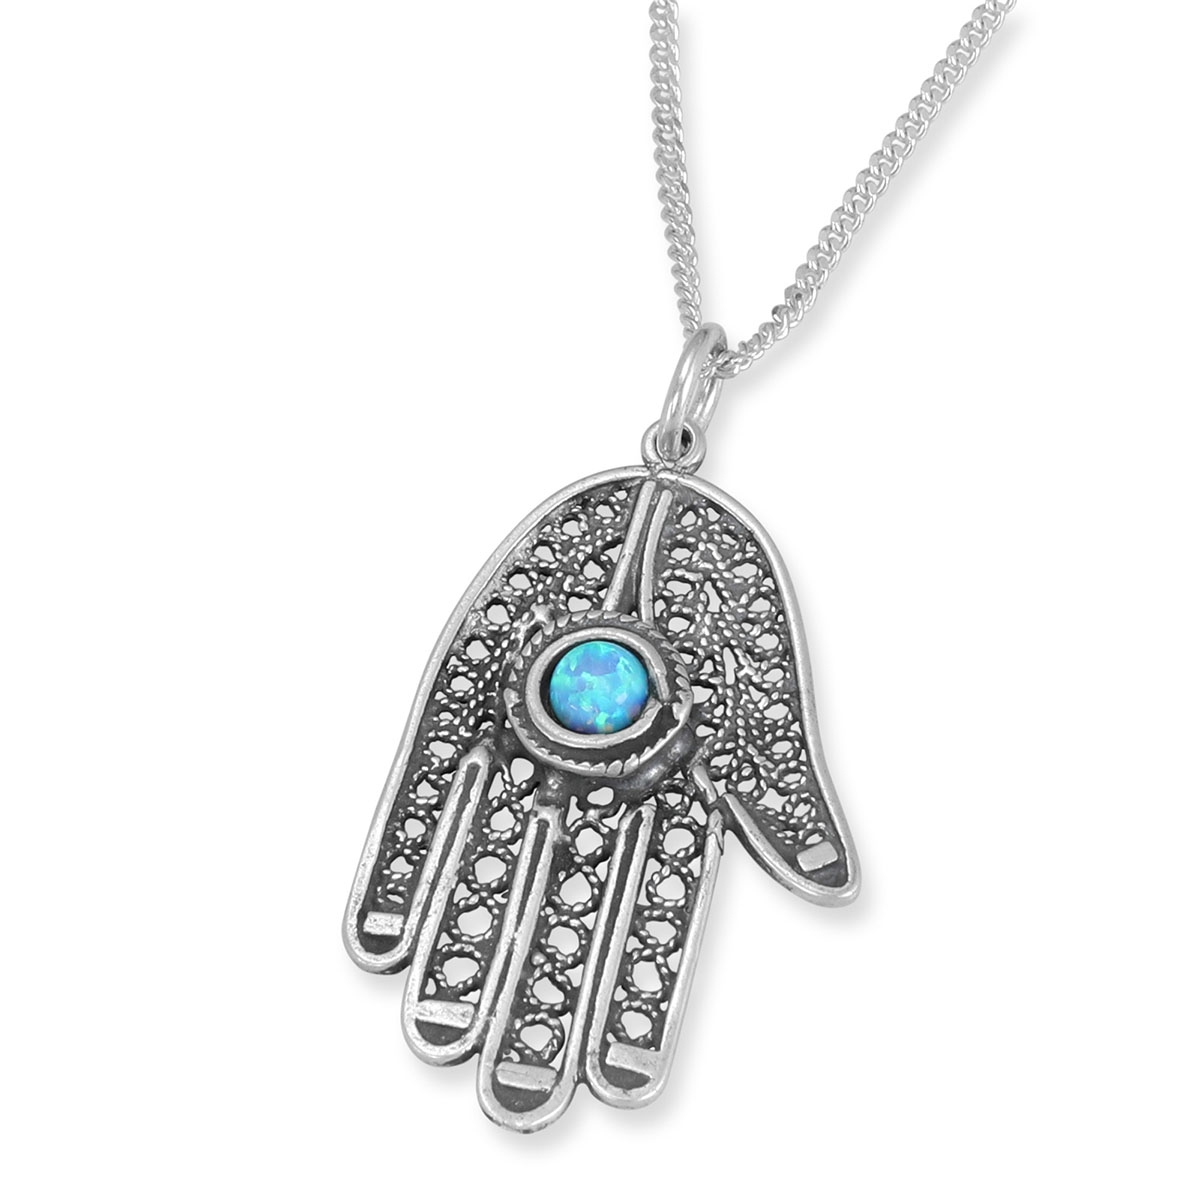 Traditional Yemenite Art Handcrafted Sterling Silver Filigreed Hamsa Necklace With Blue Opal Stone - 1